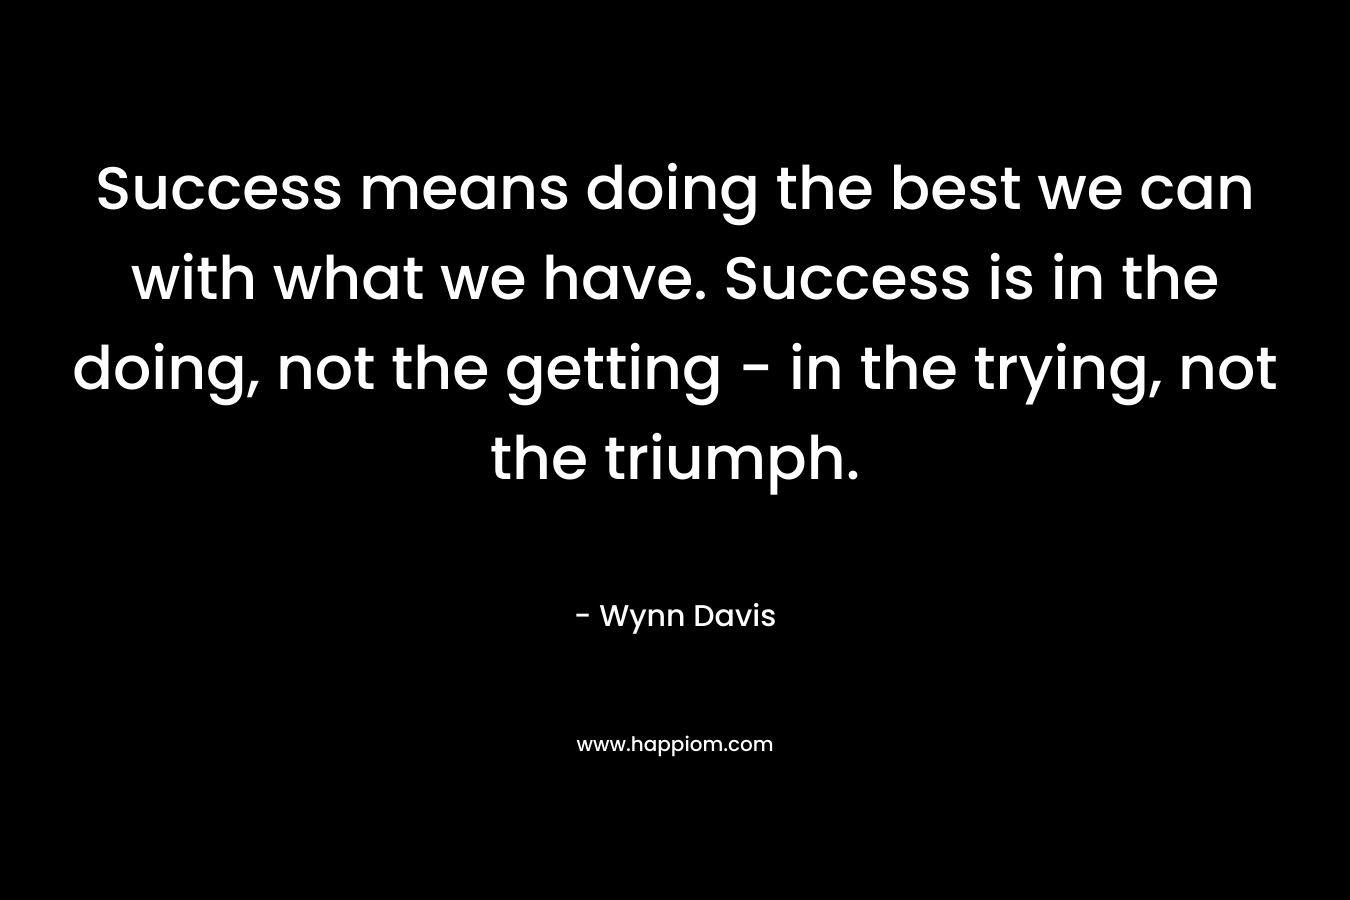 Success means doing the best we can with what we have. Success is in the doing, not the getting - in the trying, not the triumph.